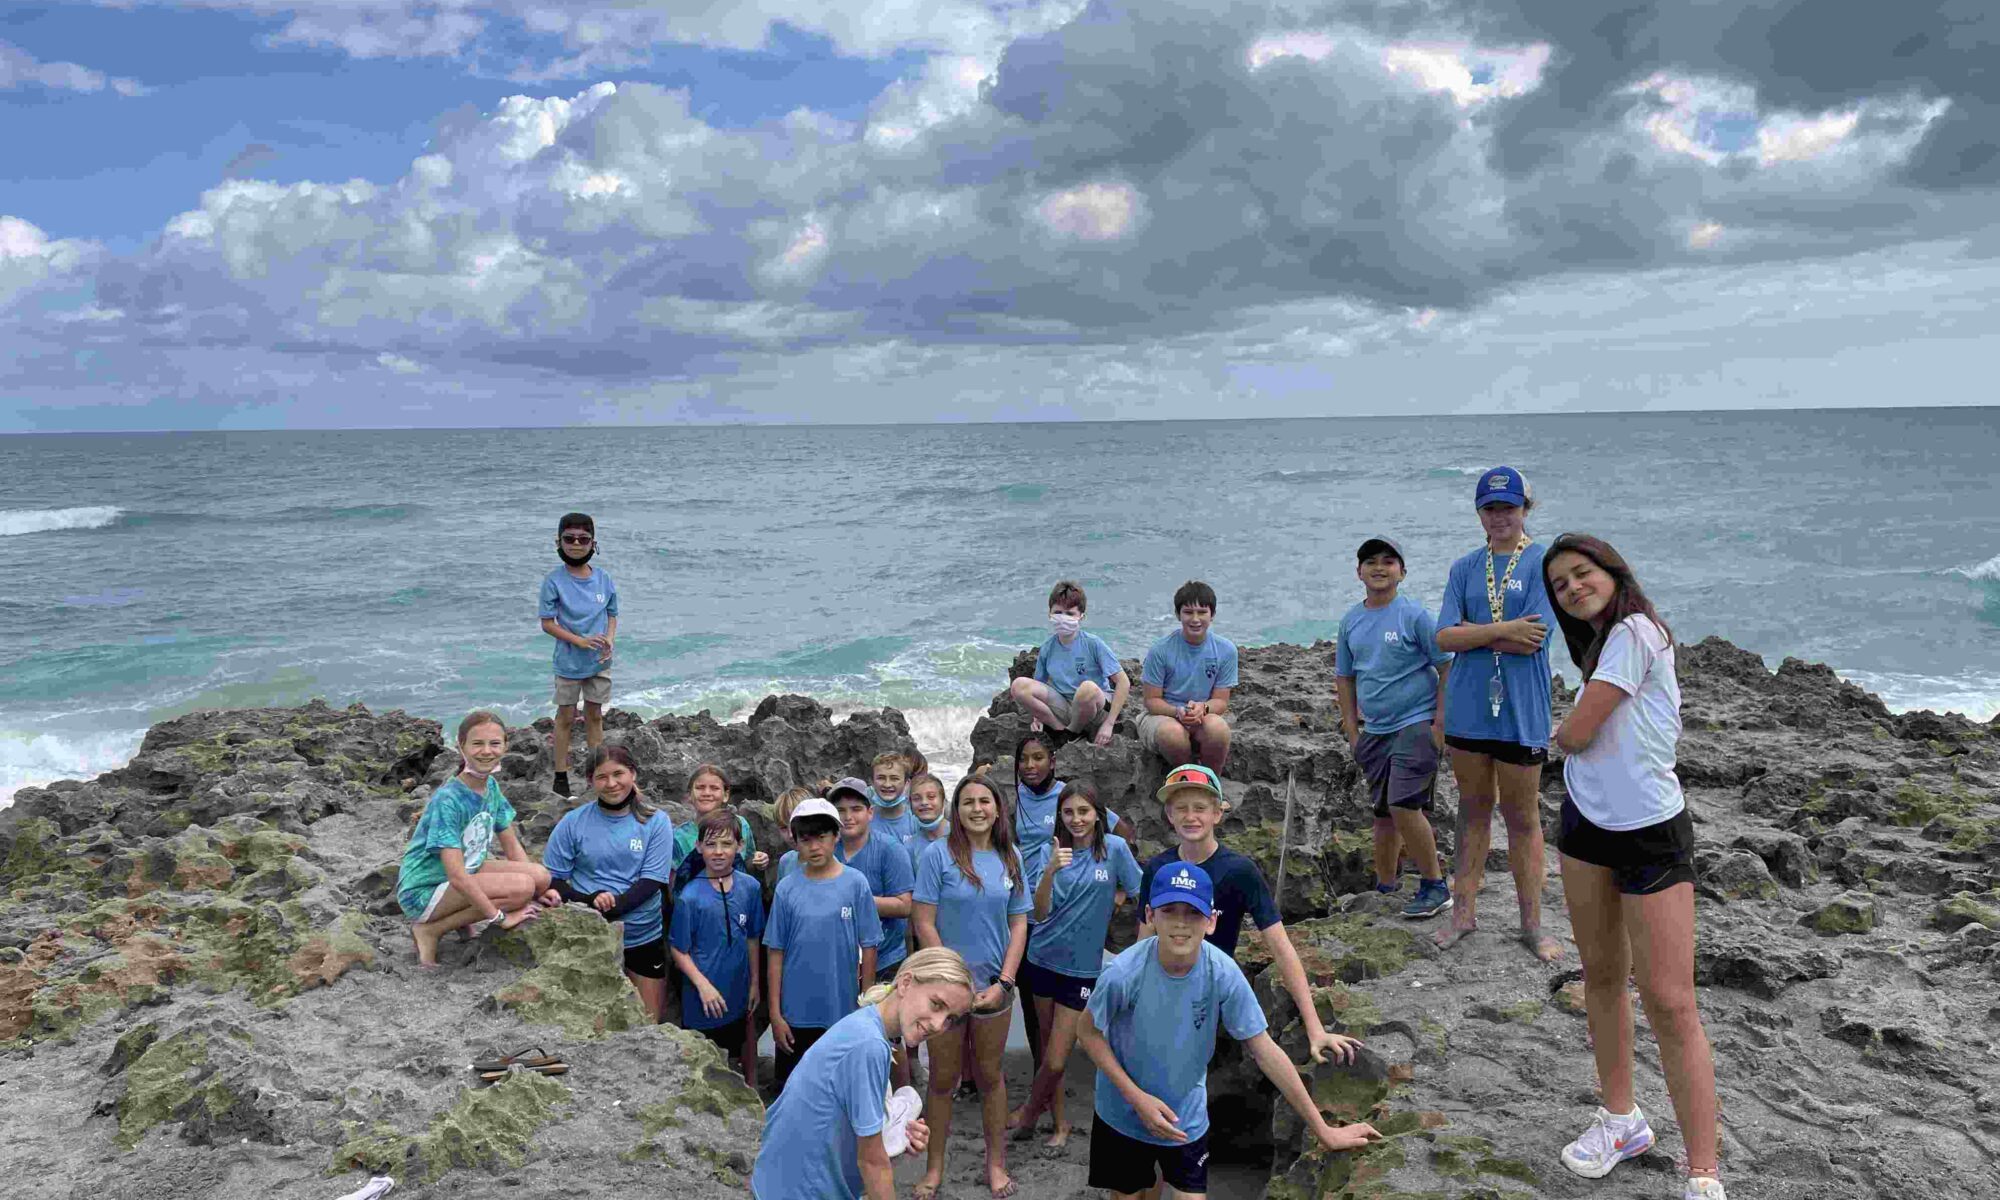 Science and Religion Meet at Rosarian 6th Grade Field Trip to Blowing Rocks